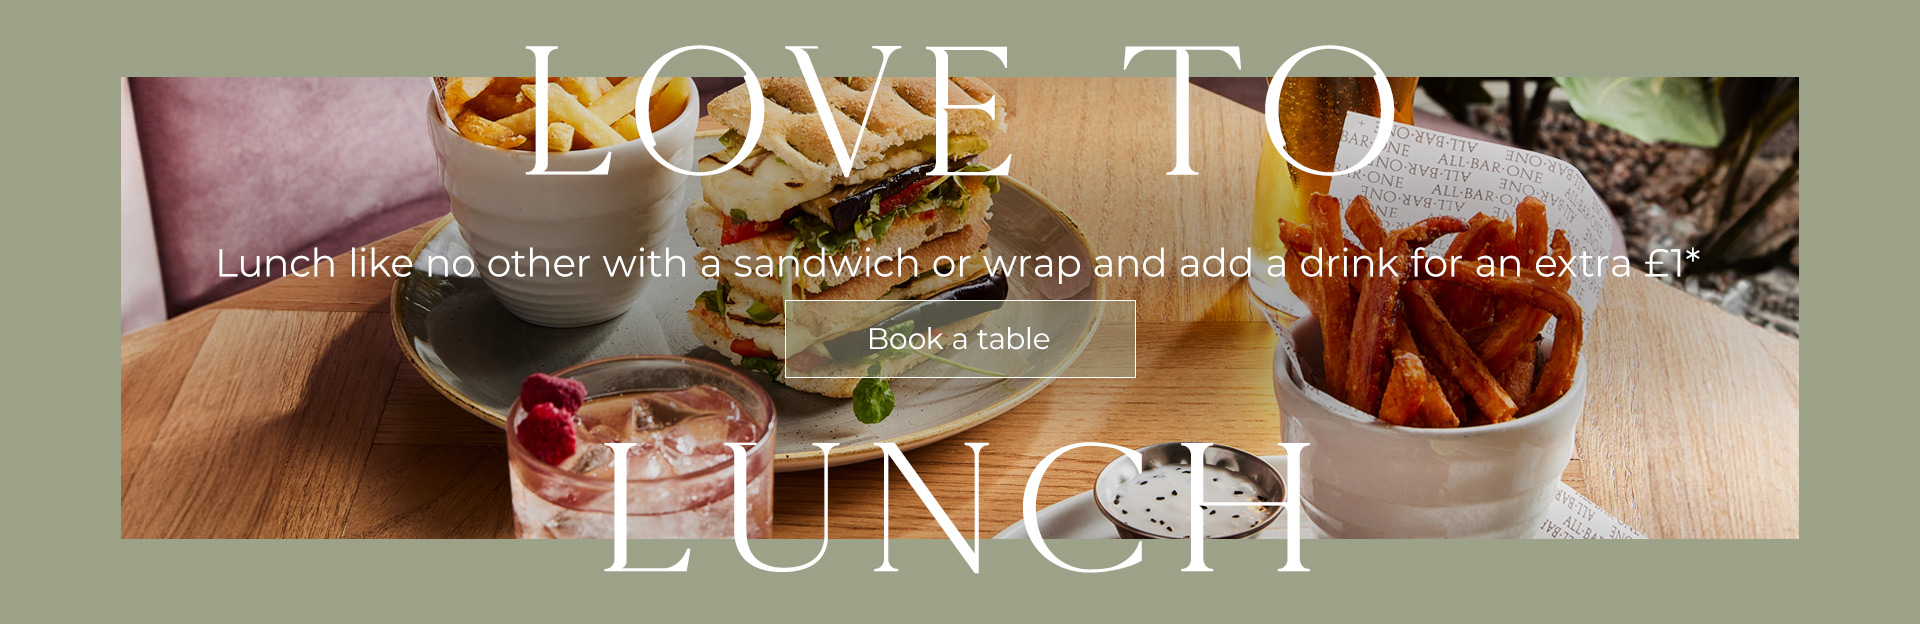 Lunch Offer at All Bar One Worcester